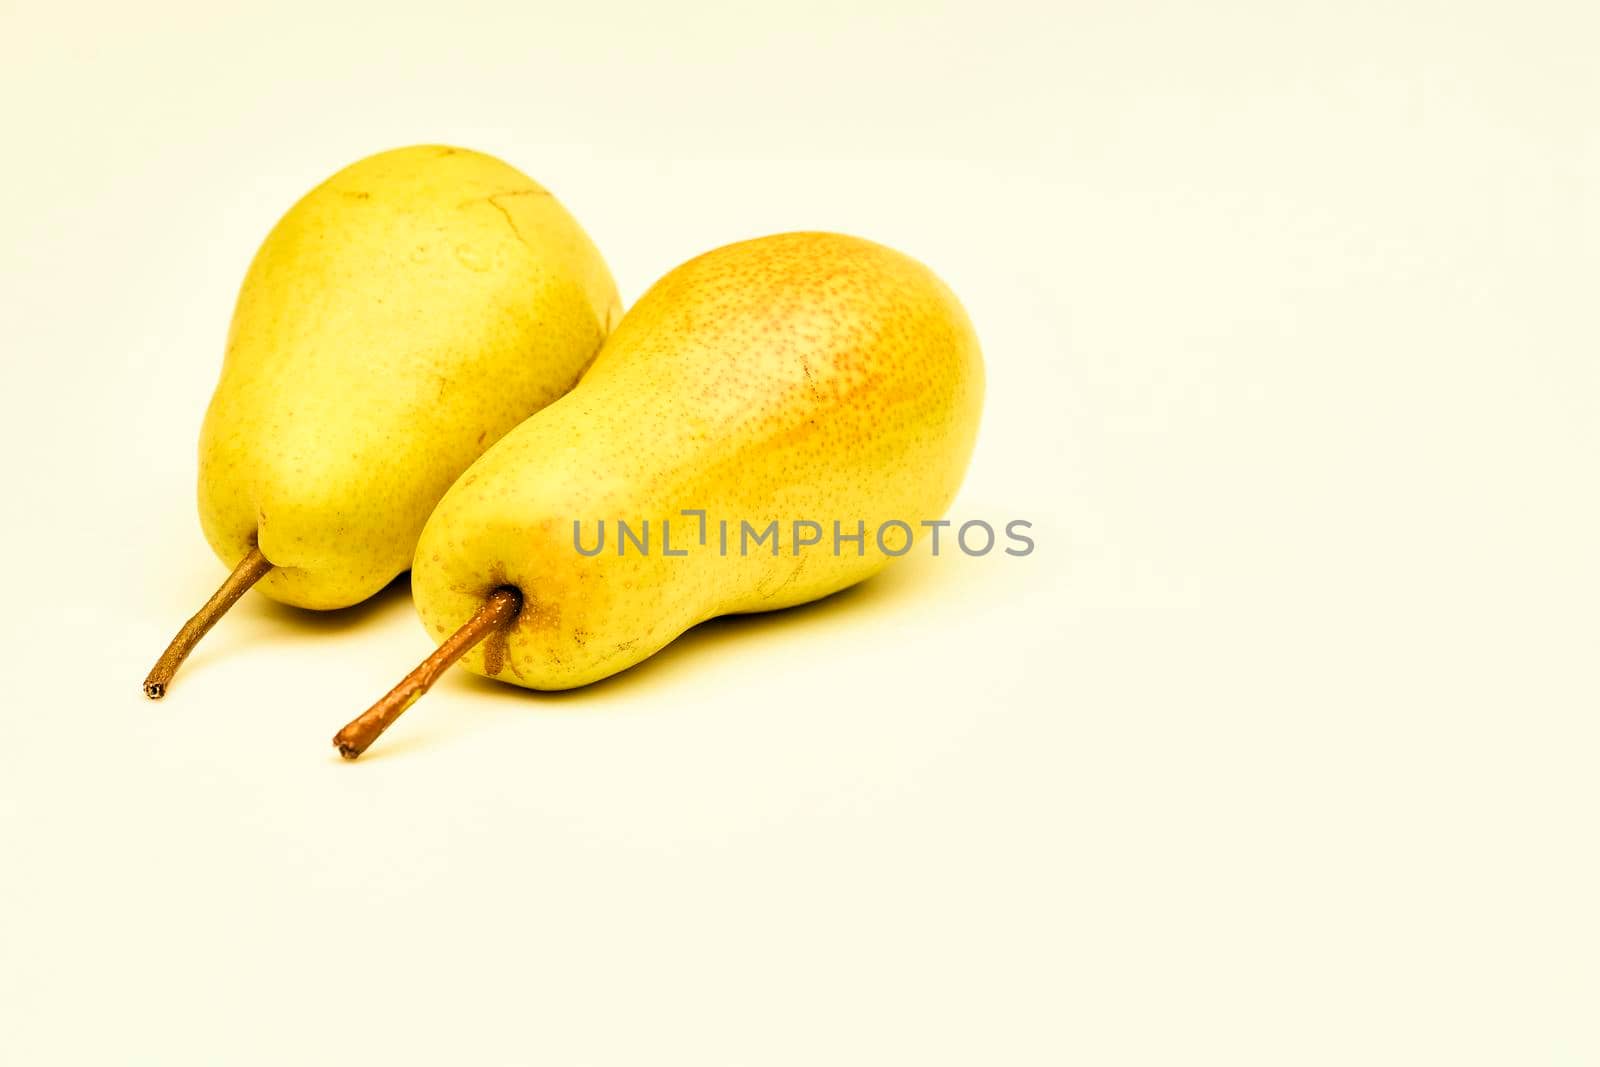 Two yellow ripe pears on an isolated white background by jovani68